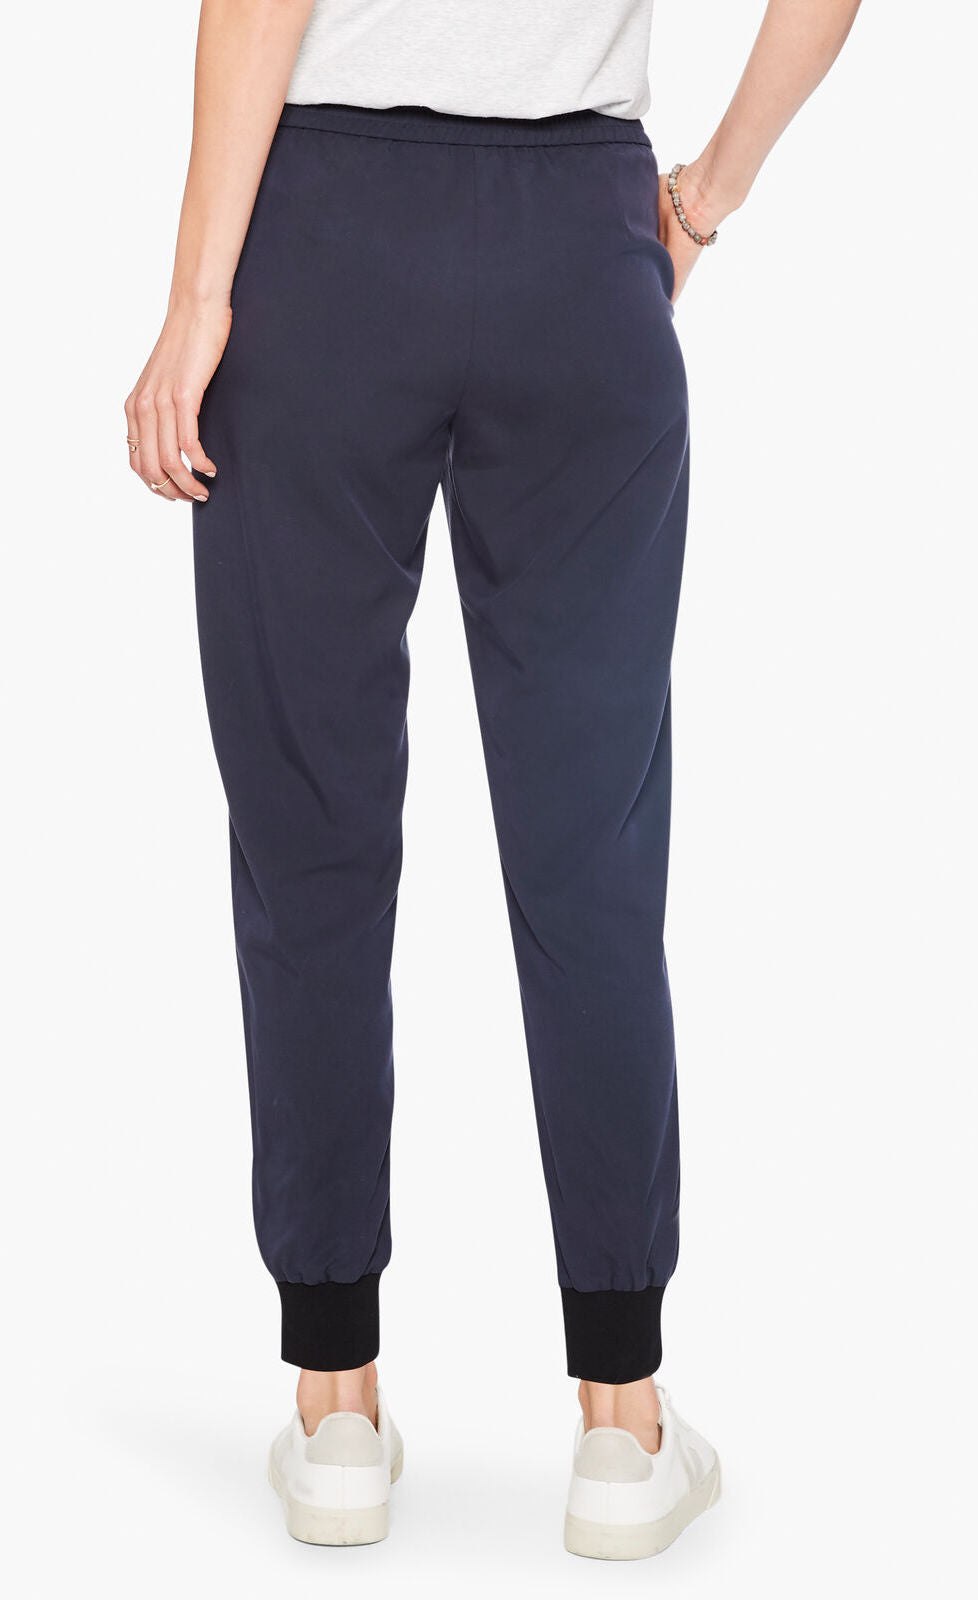 Back bottom half view of a woman wearing the nic and zoe stretch tencel jogger. These joggers are dark indigo with a tapered fit and side pockets.